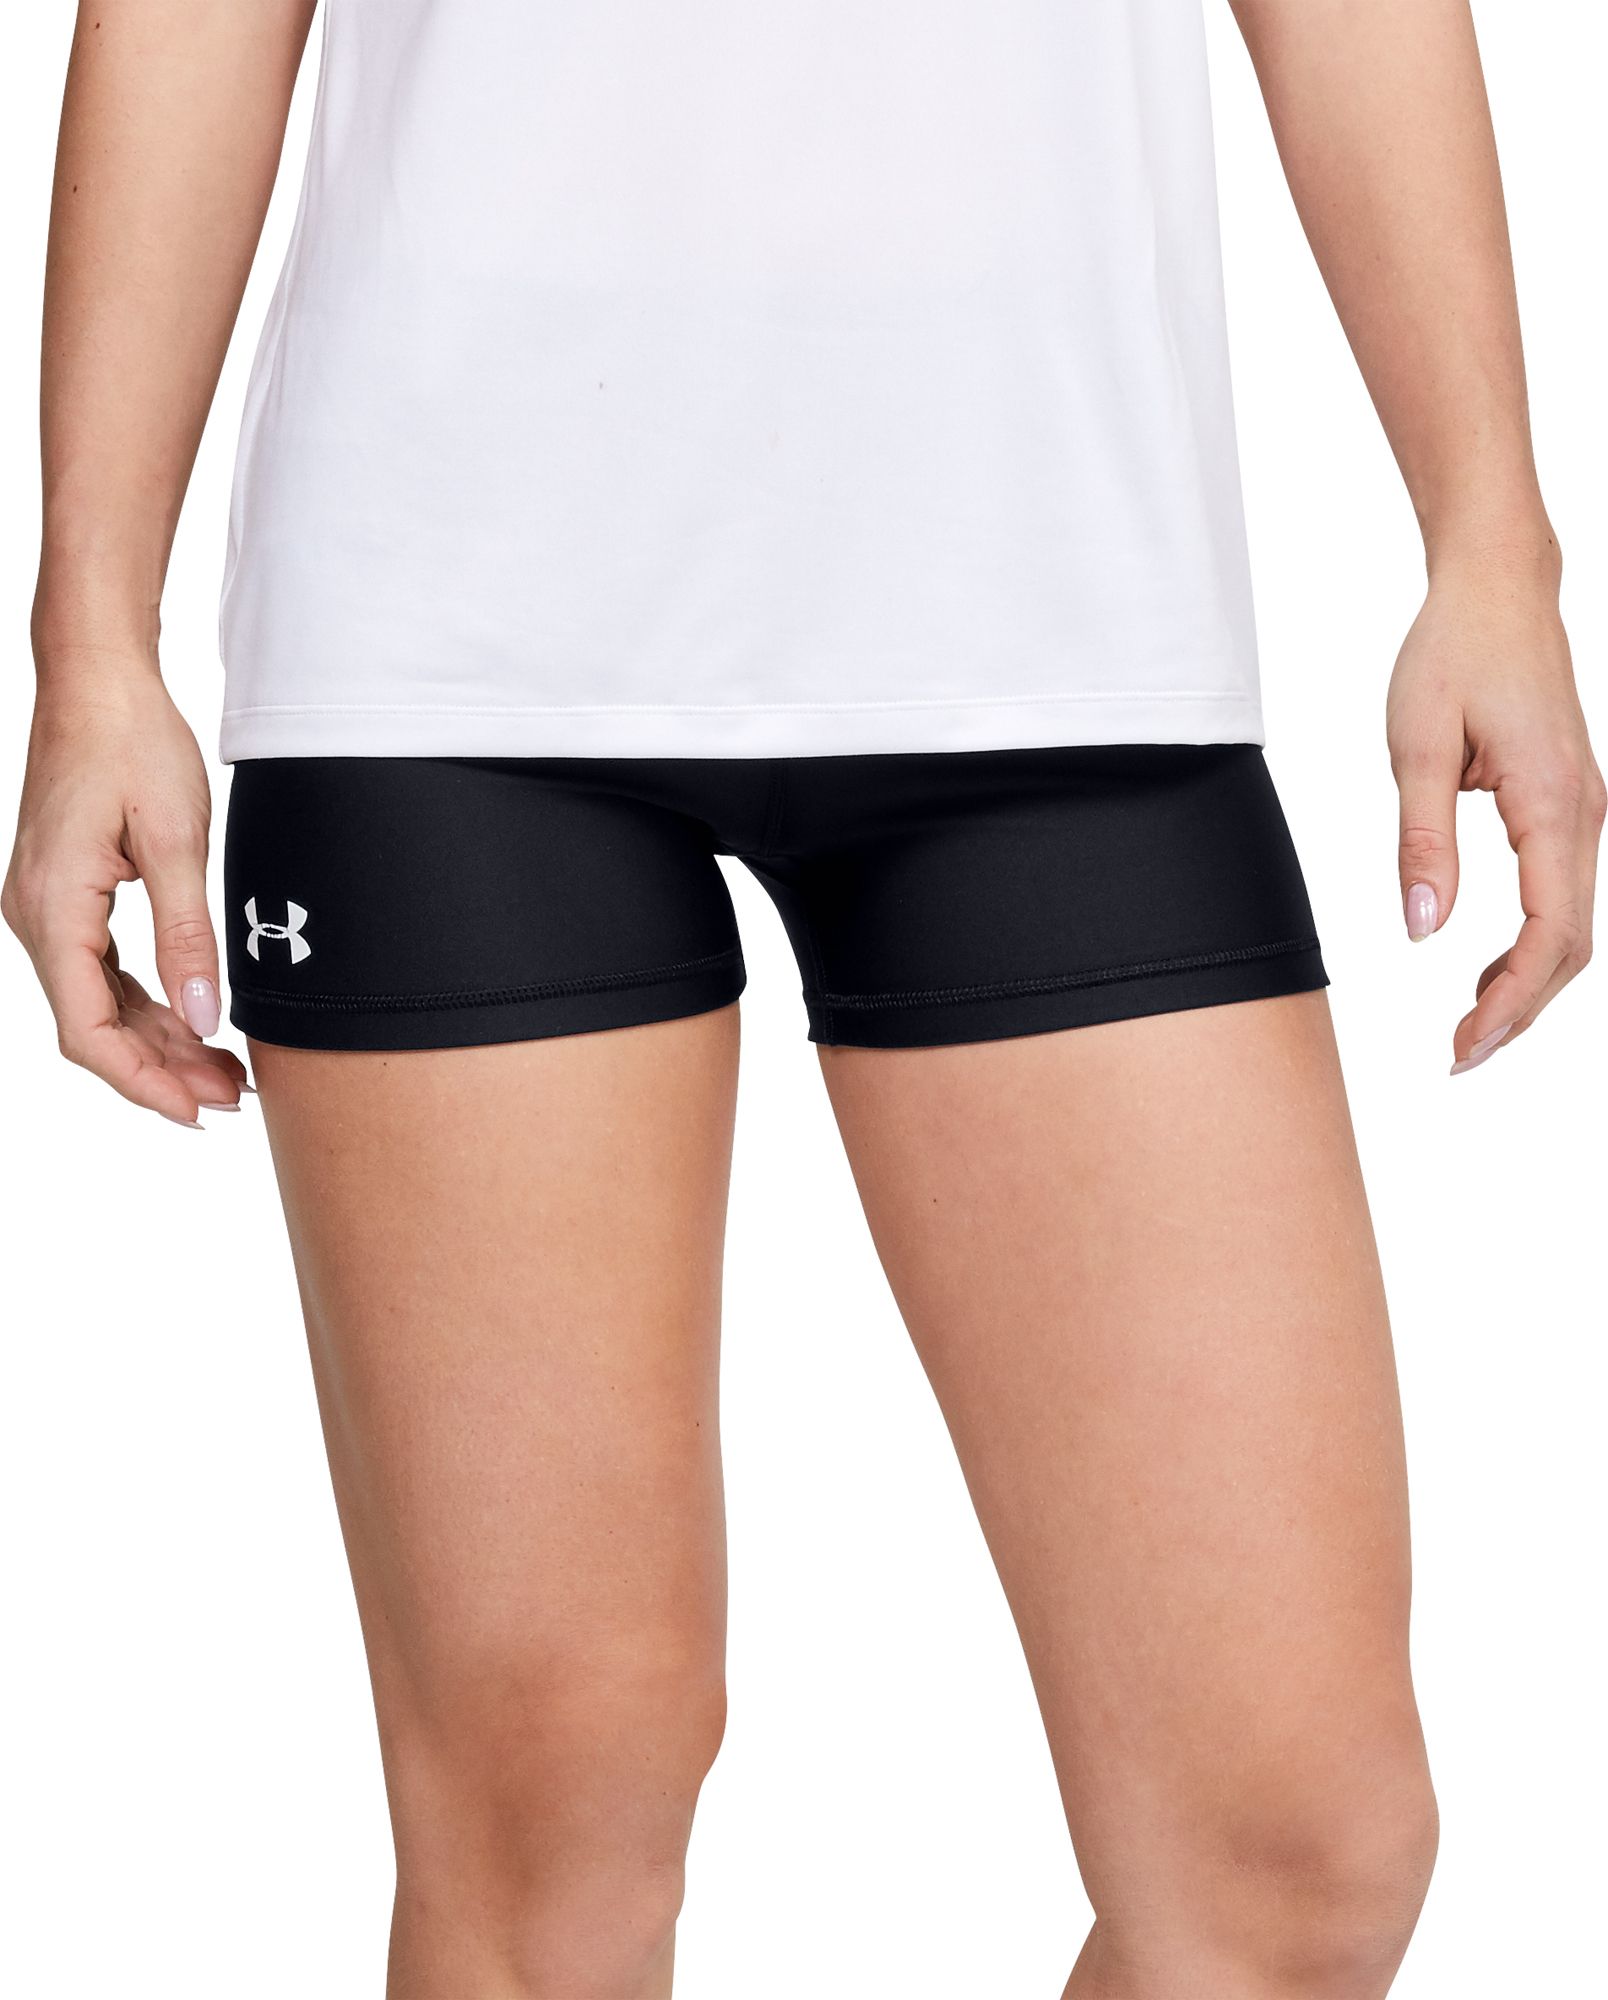 Under Armour Women's Armour Mid Rise Shorts